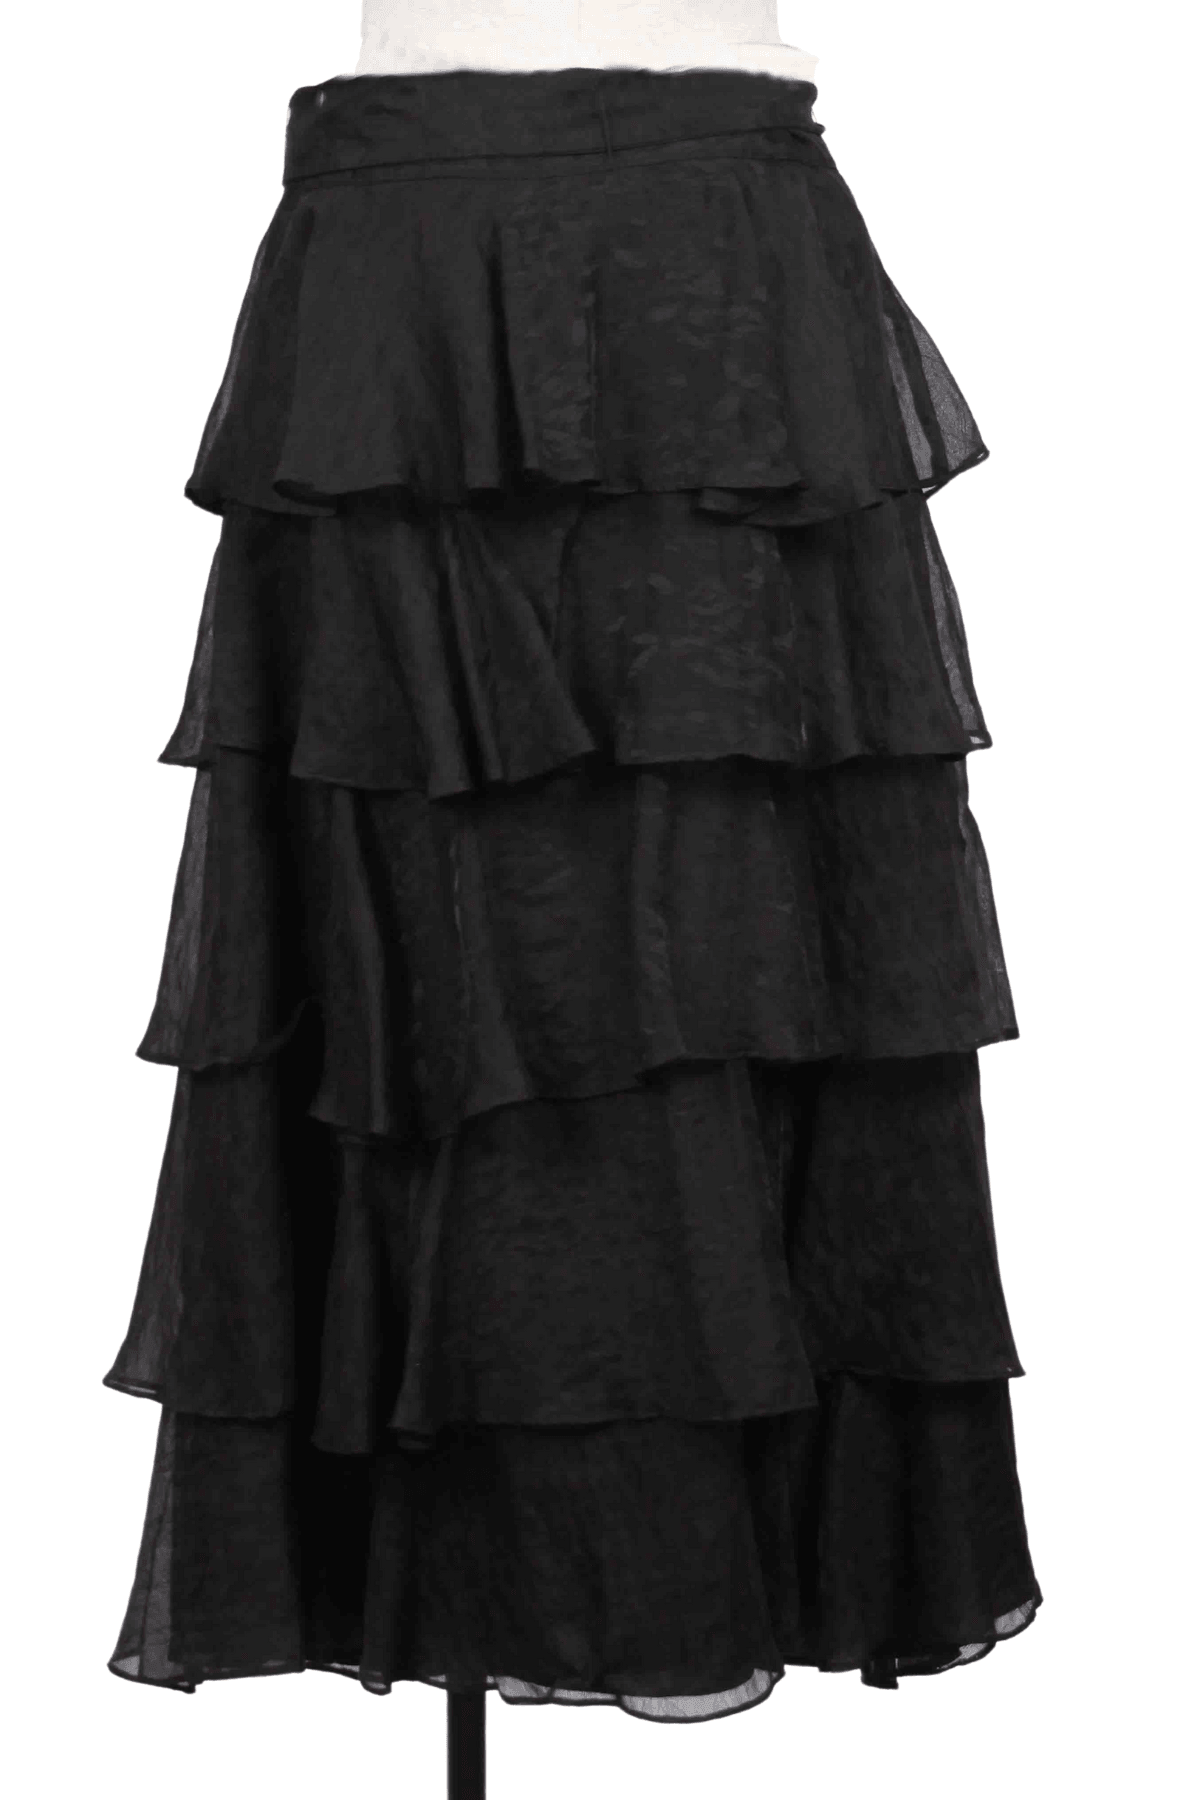 back view of black Ruffled Tiered Adler Skirt by Marie Oliver